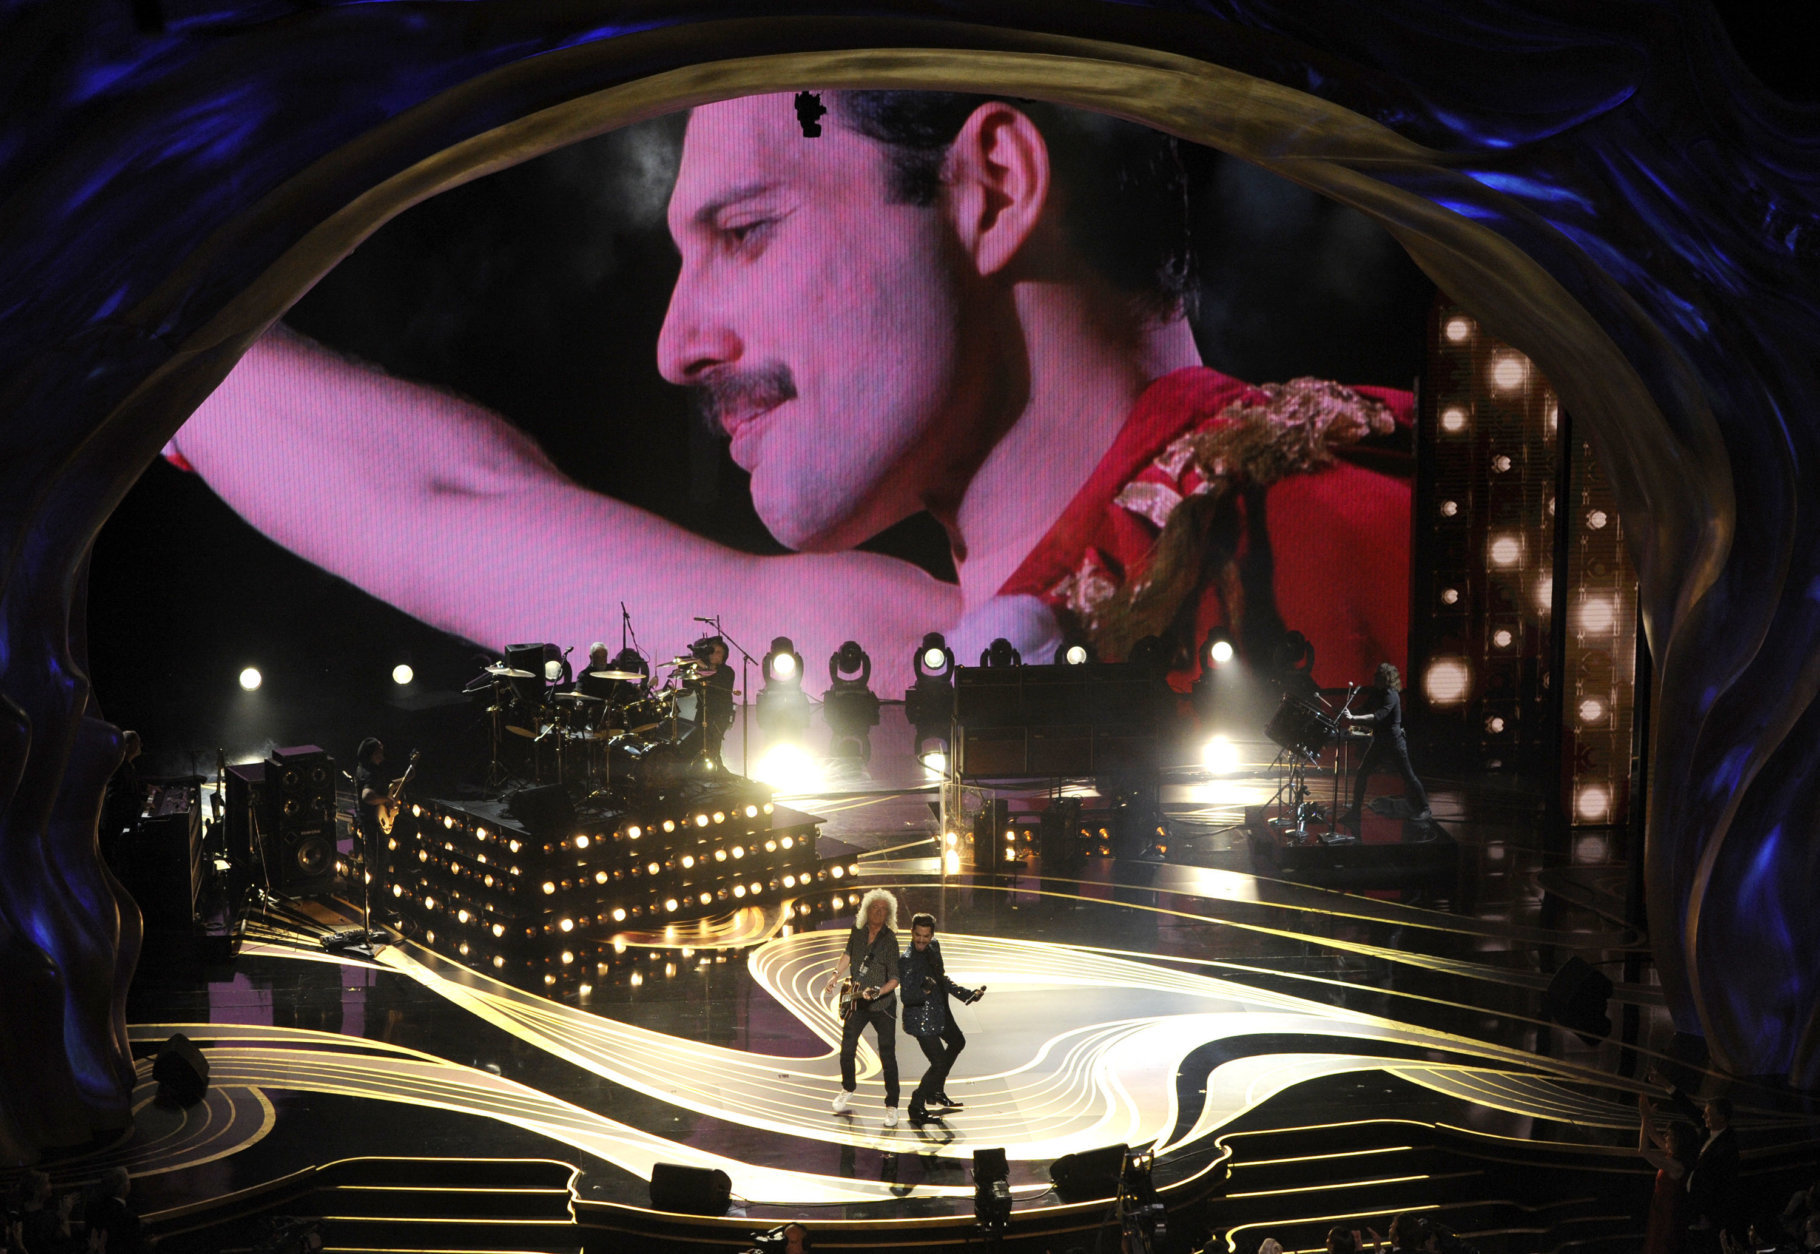 An image of Freddie Mercury appears on screen as Brian May, left, and Adam Lambert of Queen perform at the Oscars on Sunday, Feb. 24, 2019, at the Dolby Theatre in Los Angeles. (Photo by Chris Pizzello/Invision/AP)